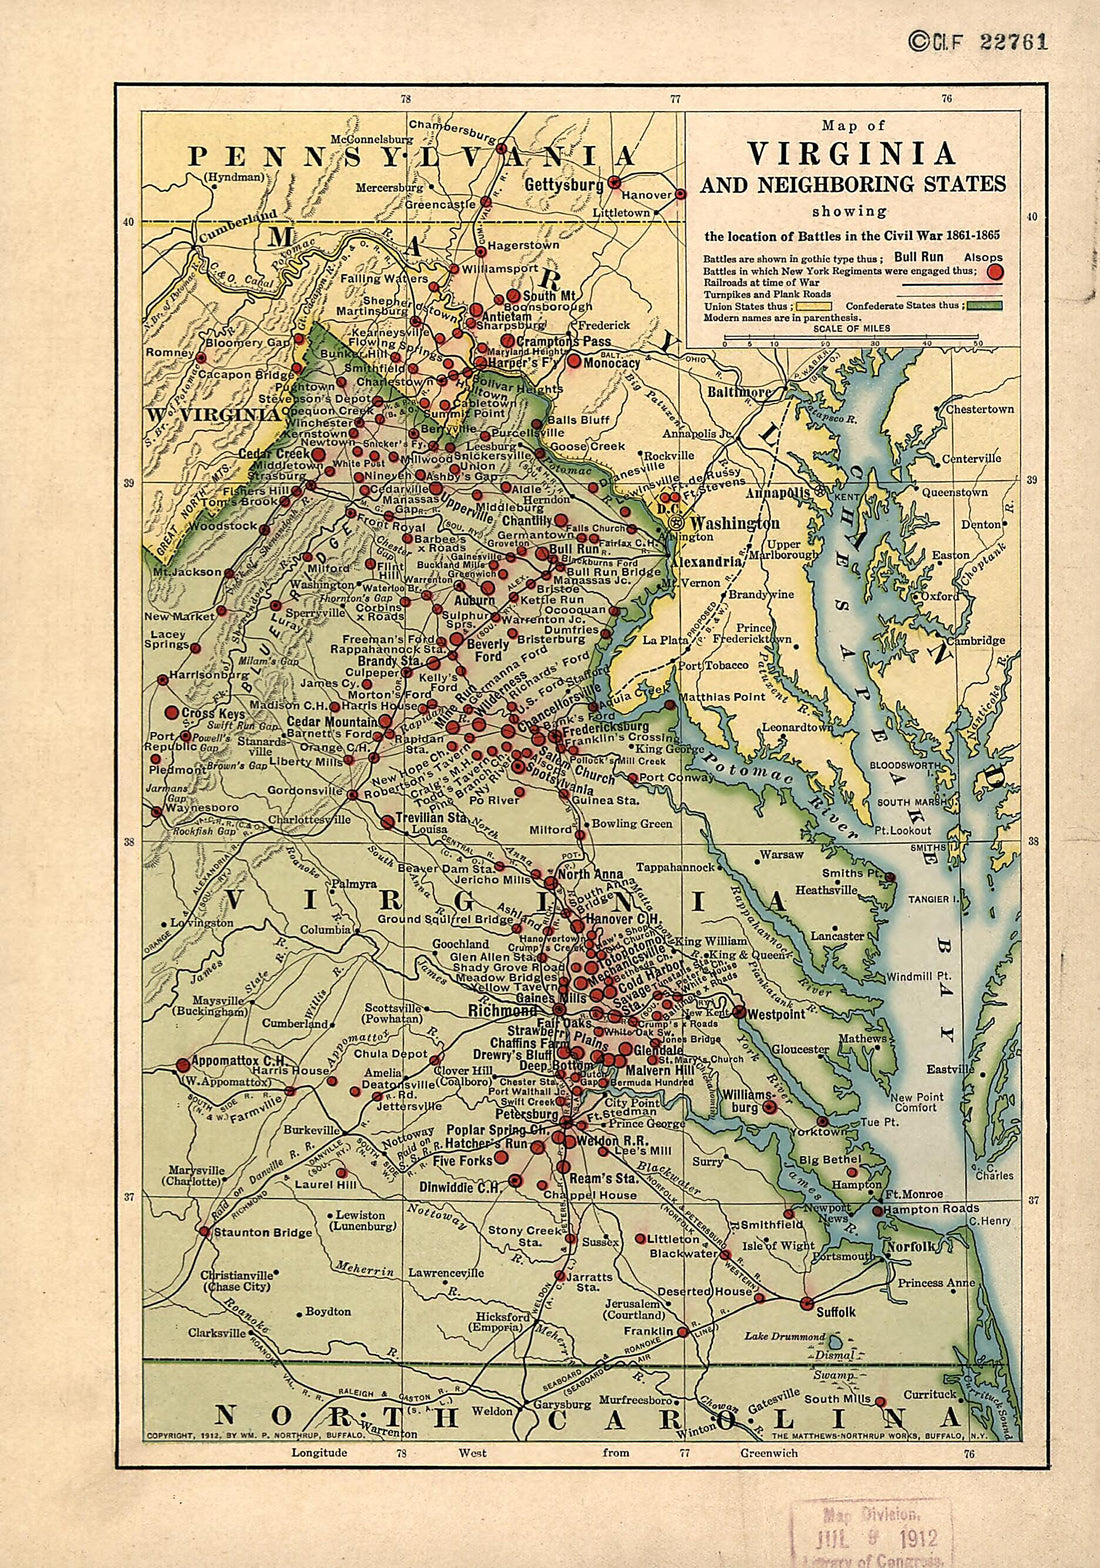 This old map of 1865 from 1912 was created by William P. Northrup in 1912